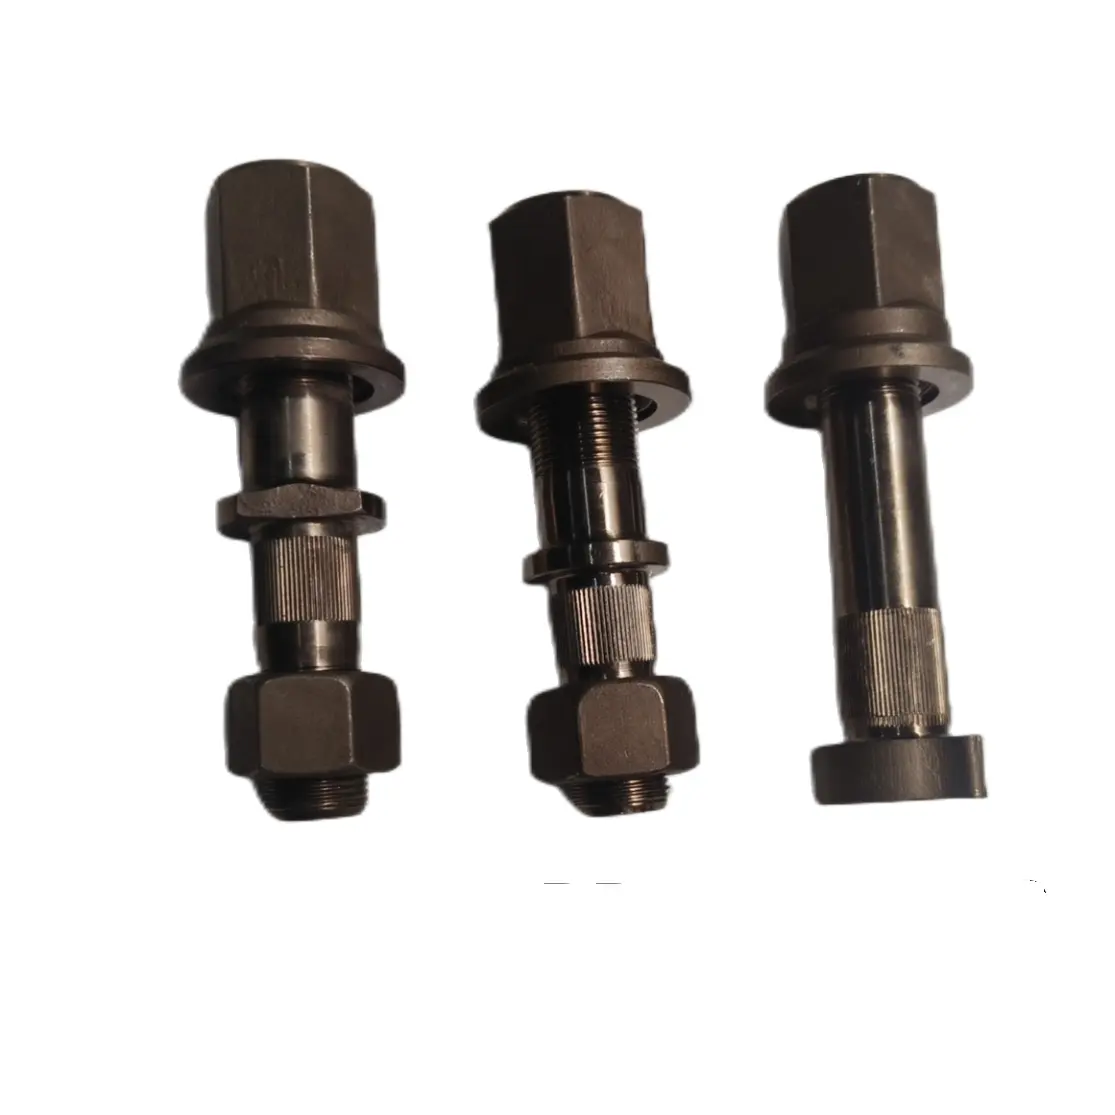 High quality hot sale China heavy duty truck parts HOWO parts truck parts tyre bolts DZ9112340123 rear wheel bolts 4x4